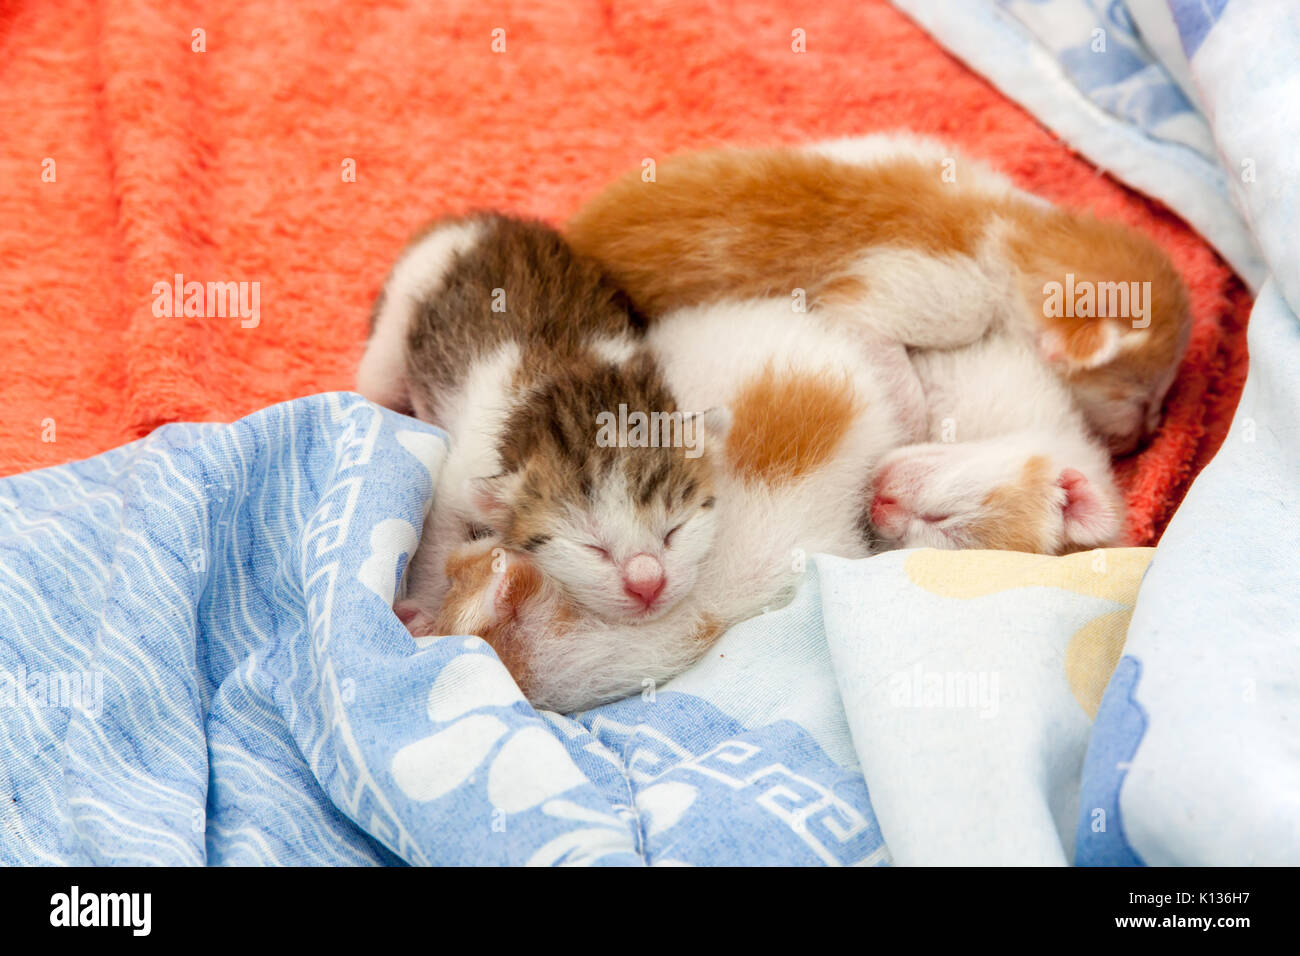 small kitten which is one day old. Lie on soft cloth. Nearly born cat with closed eyes and with small ears. Stock Photo